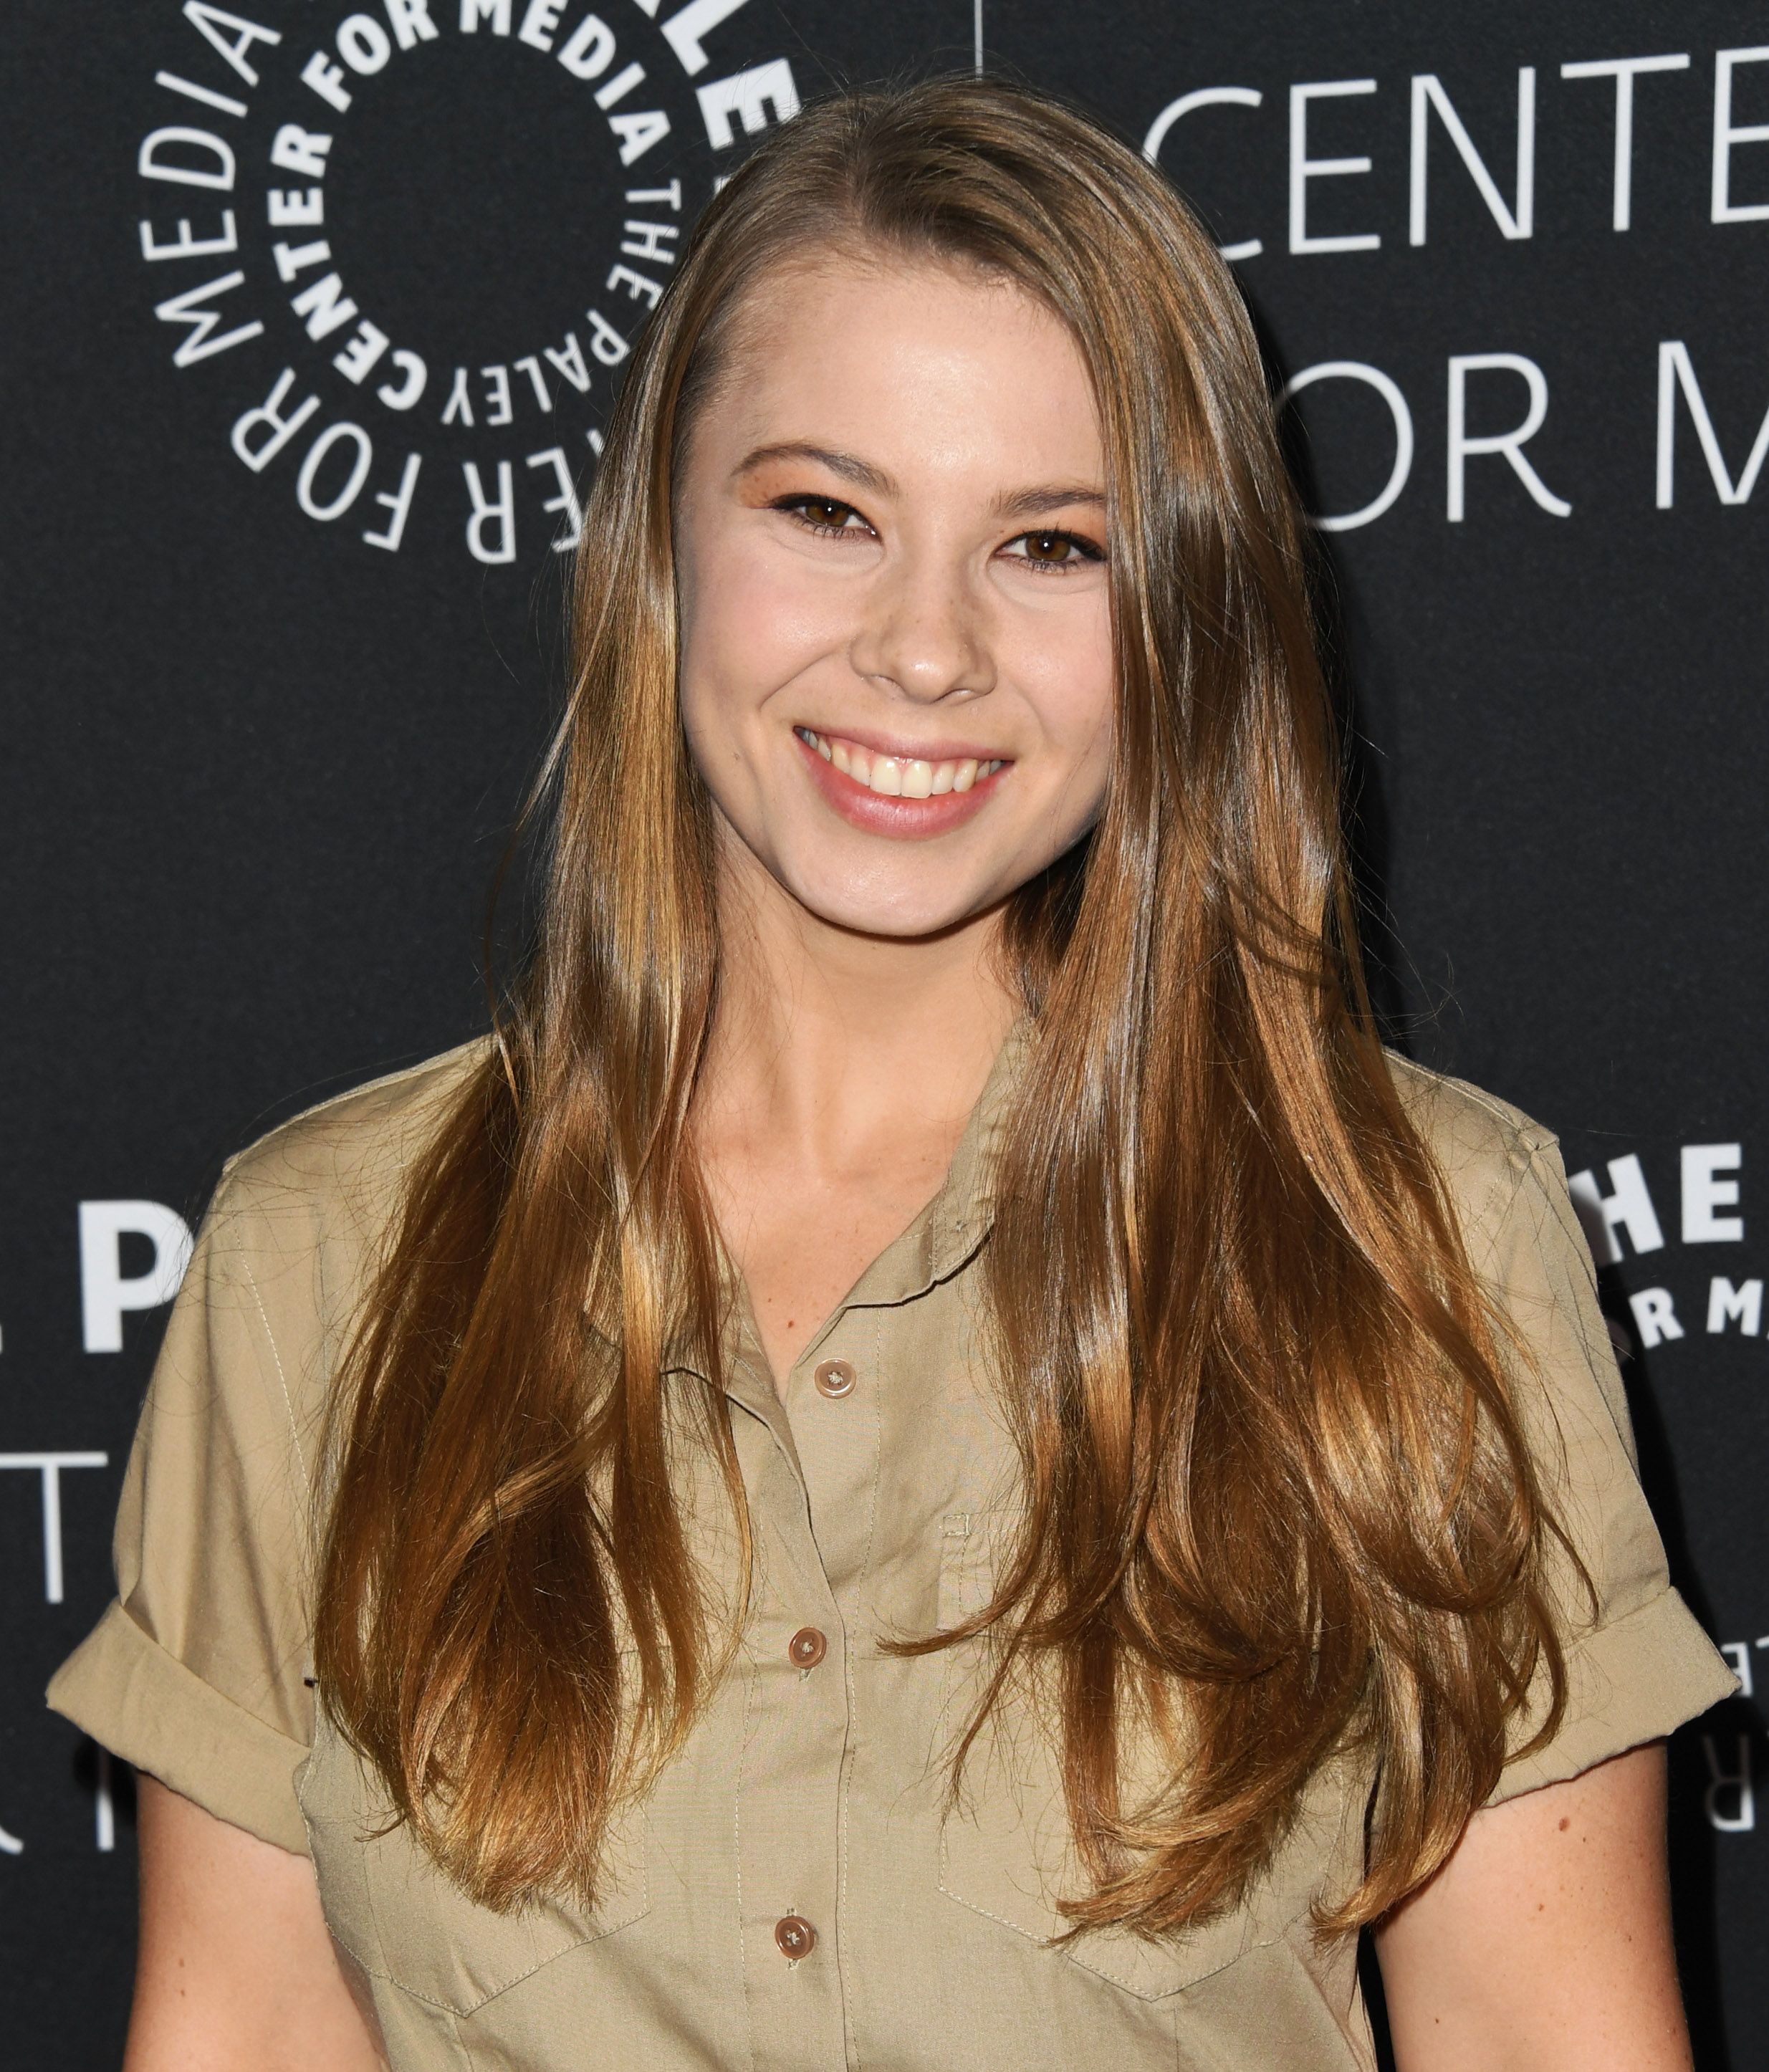 Bindi Irwin at The Paley Center For Media Presents: An Evening With The Irwins: "Crikey! It's The Irwins" Screening And Conversation on May 03, 2019. | Getty Images